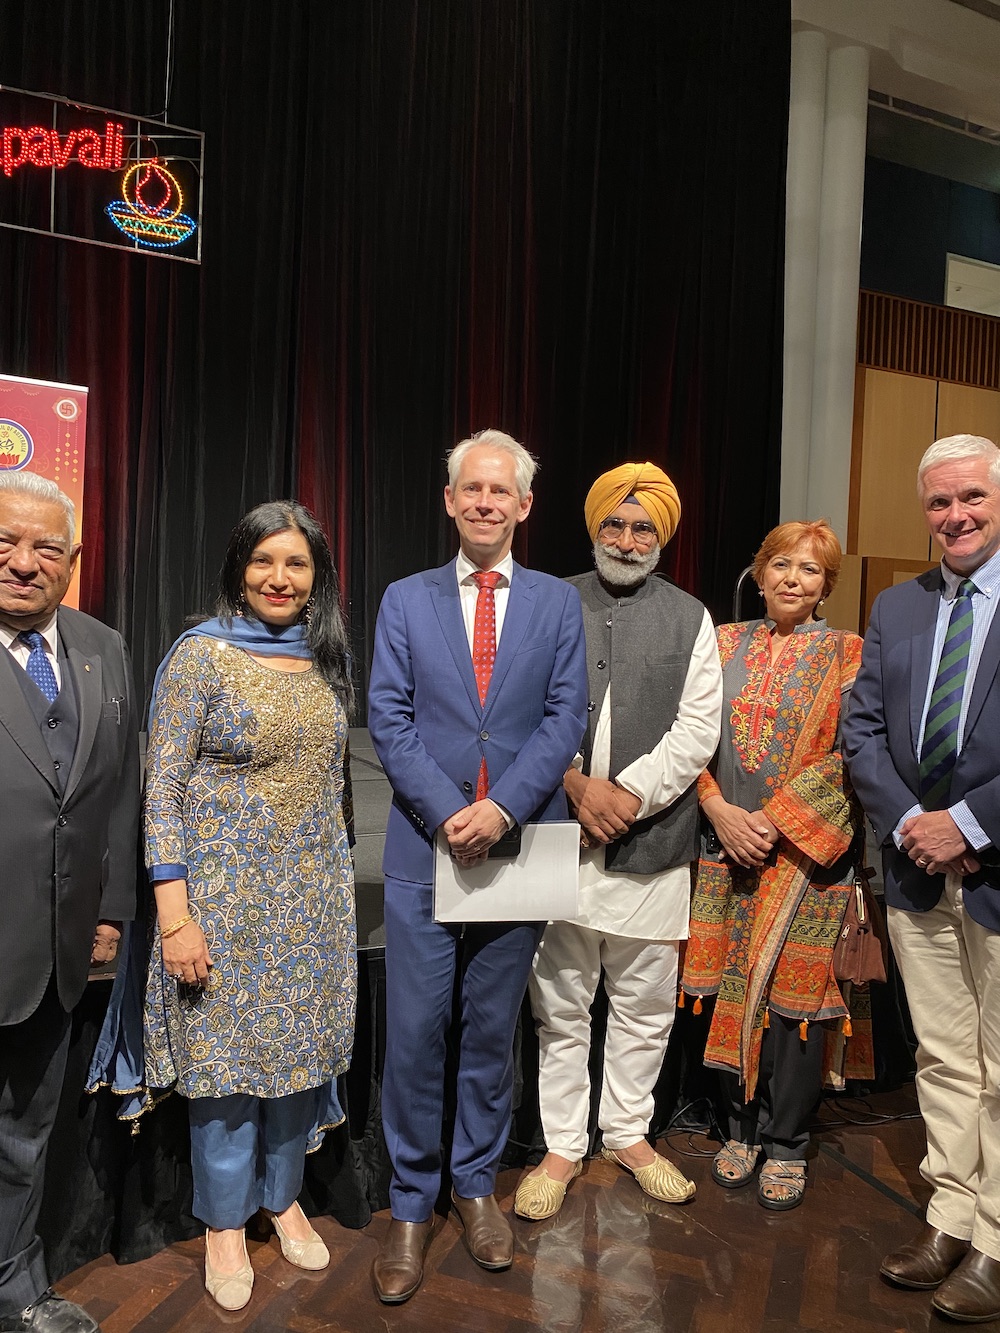 Professor Anthony Maher attends Diwali Celebrations in Canberra